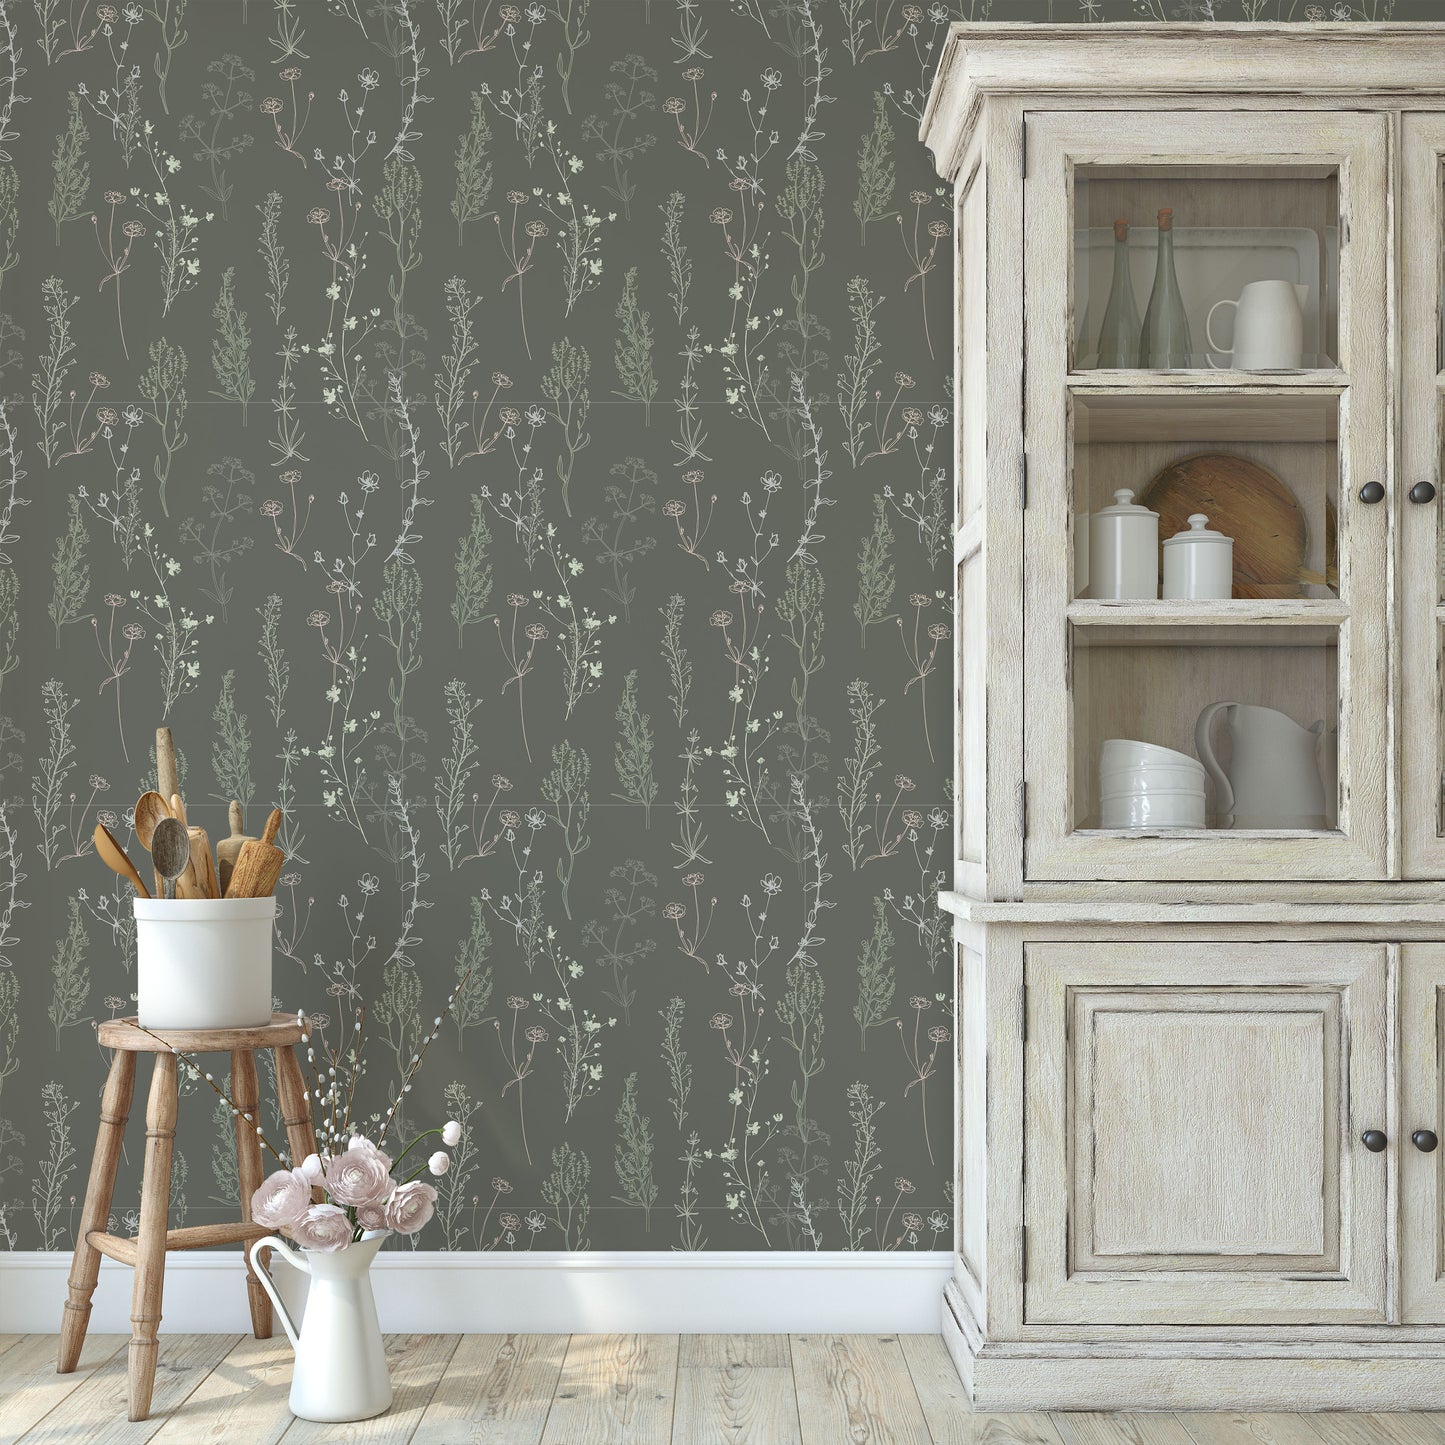 Cream foliage baby's breath plant pattern on green background easy to install and remove peel and stick custom wallpaper available in different lengths/sizes locally created and printed in Canada Artichoke wallpaper. Washable, durable, commercial grade, removable and waterproof.